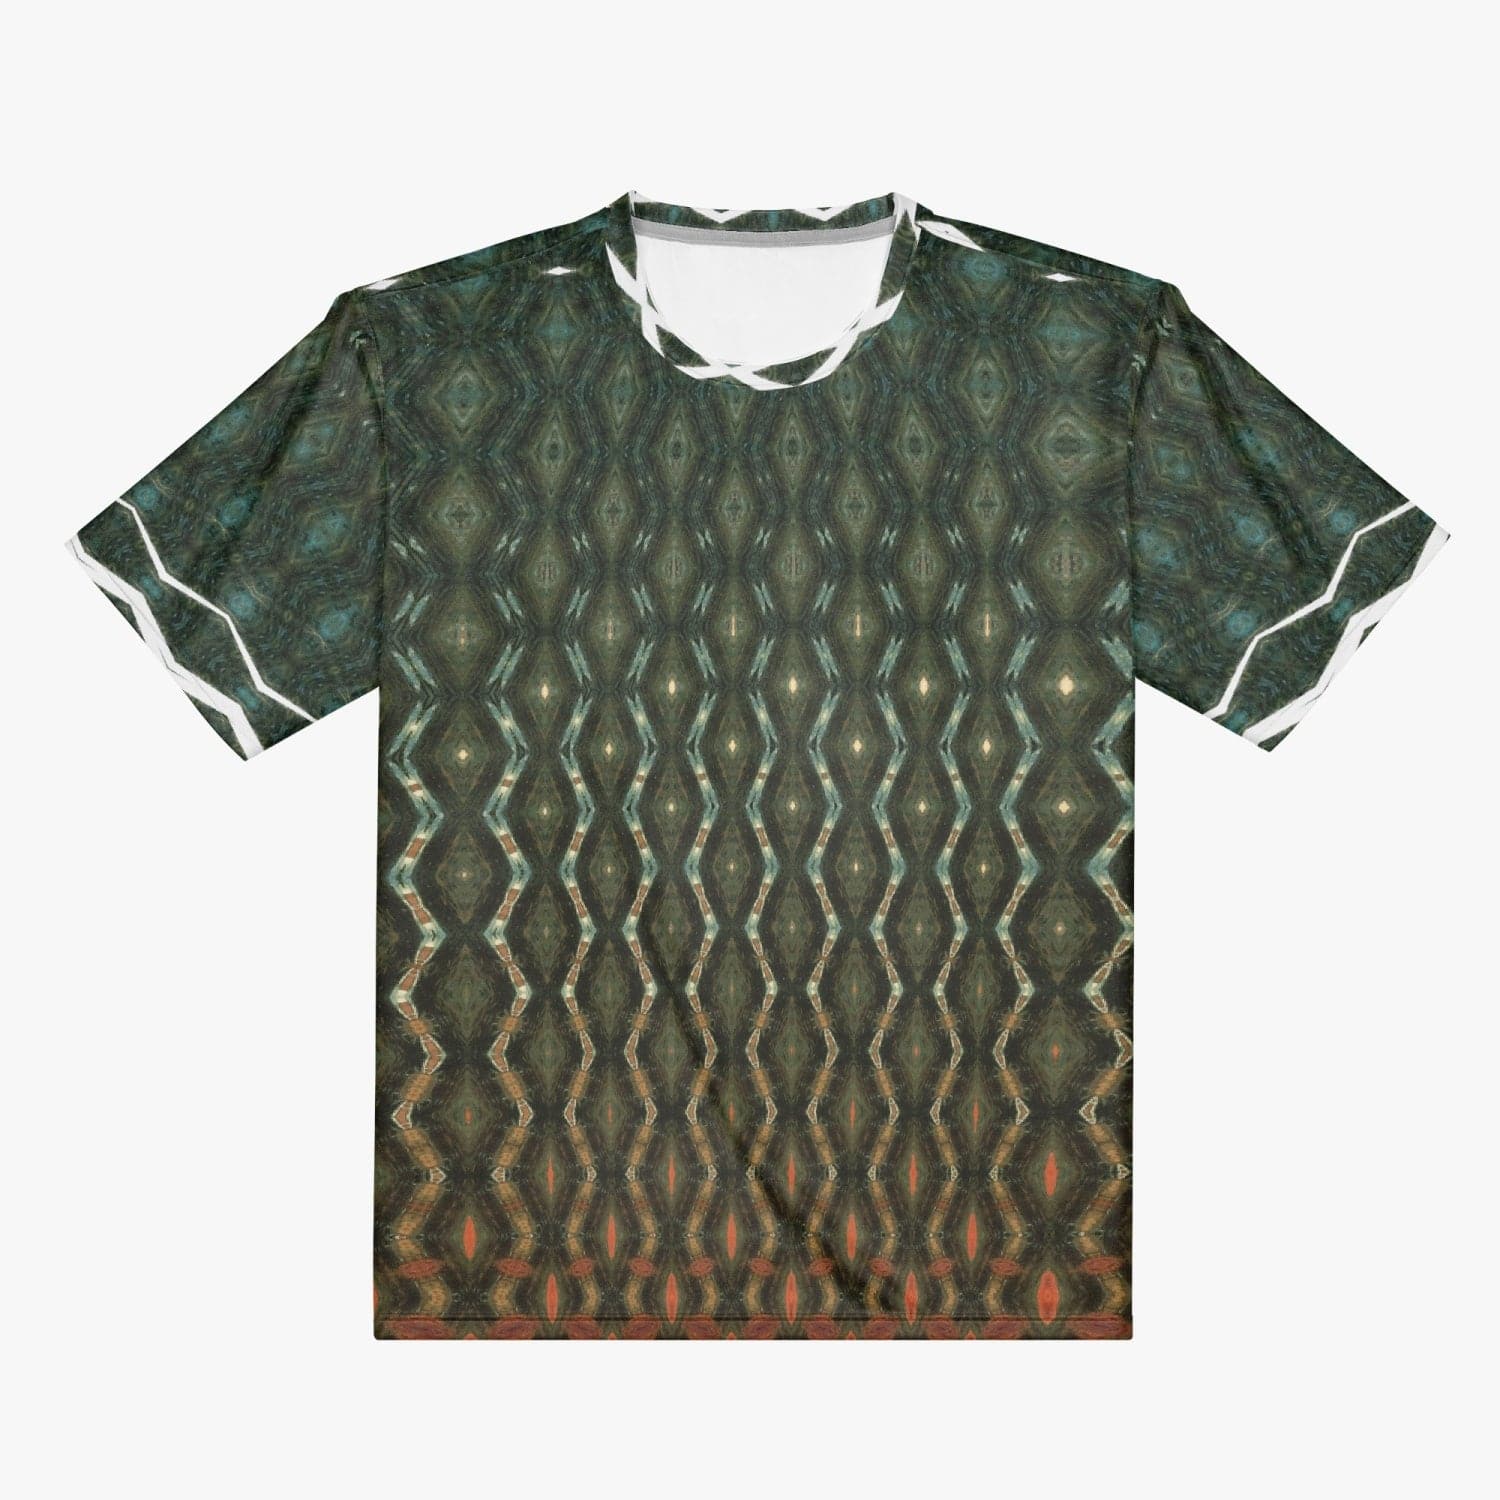 Green Patterned Handmade T-shirt with Orange and White Elements